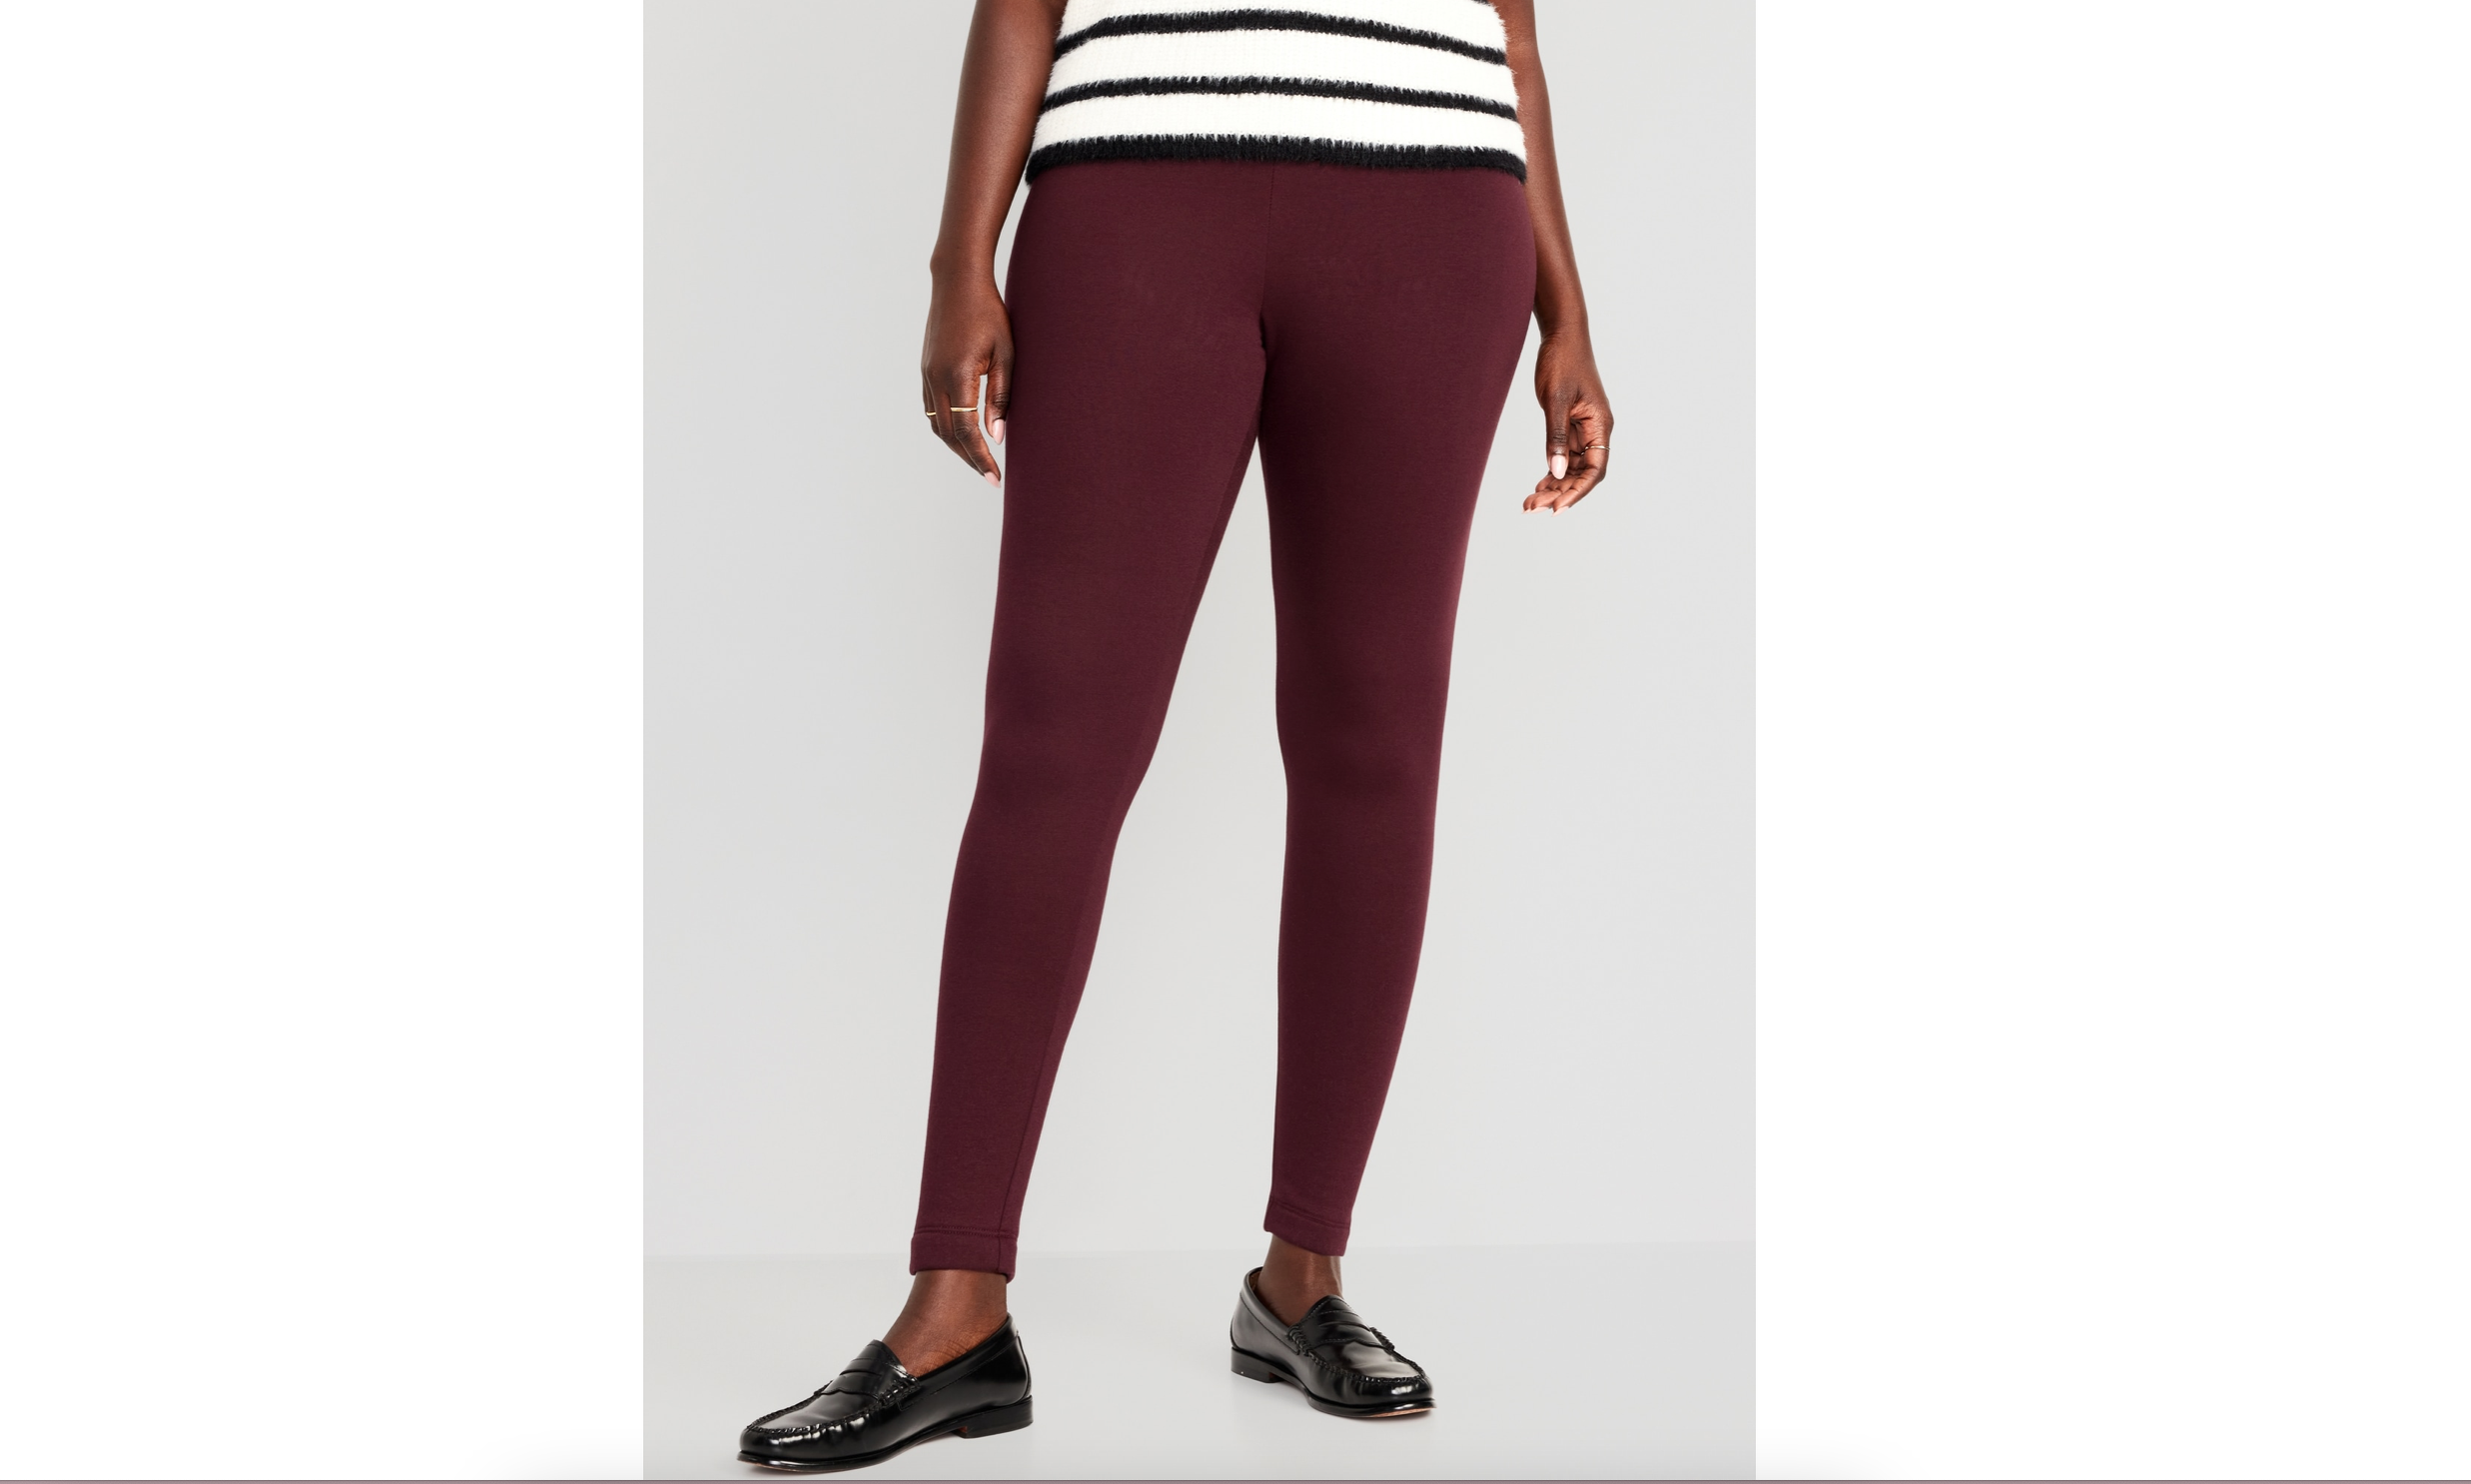 Stay Warm and Stylish with These Plus Size Fleece Lined Leggings